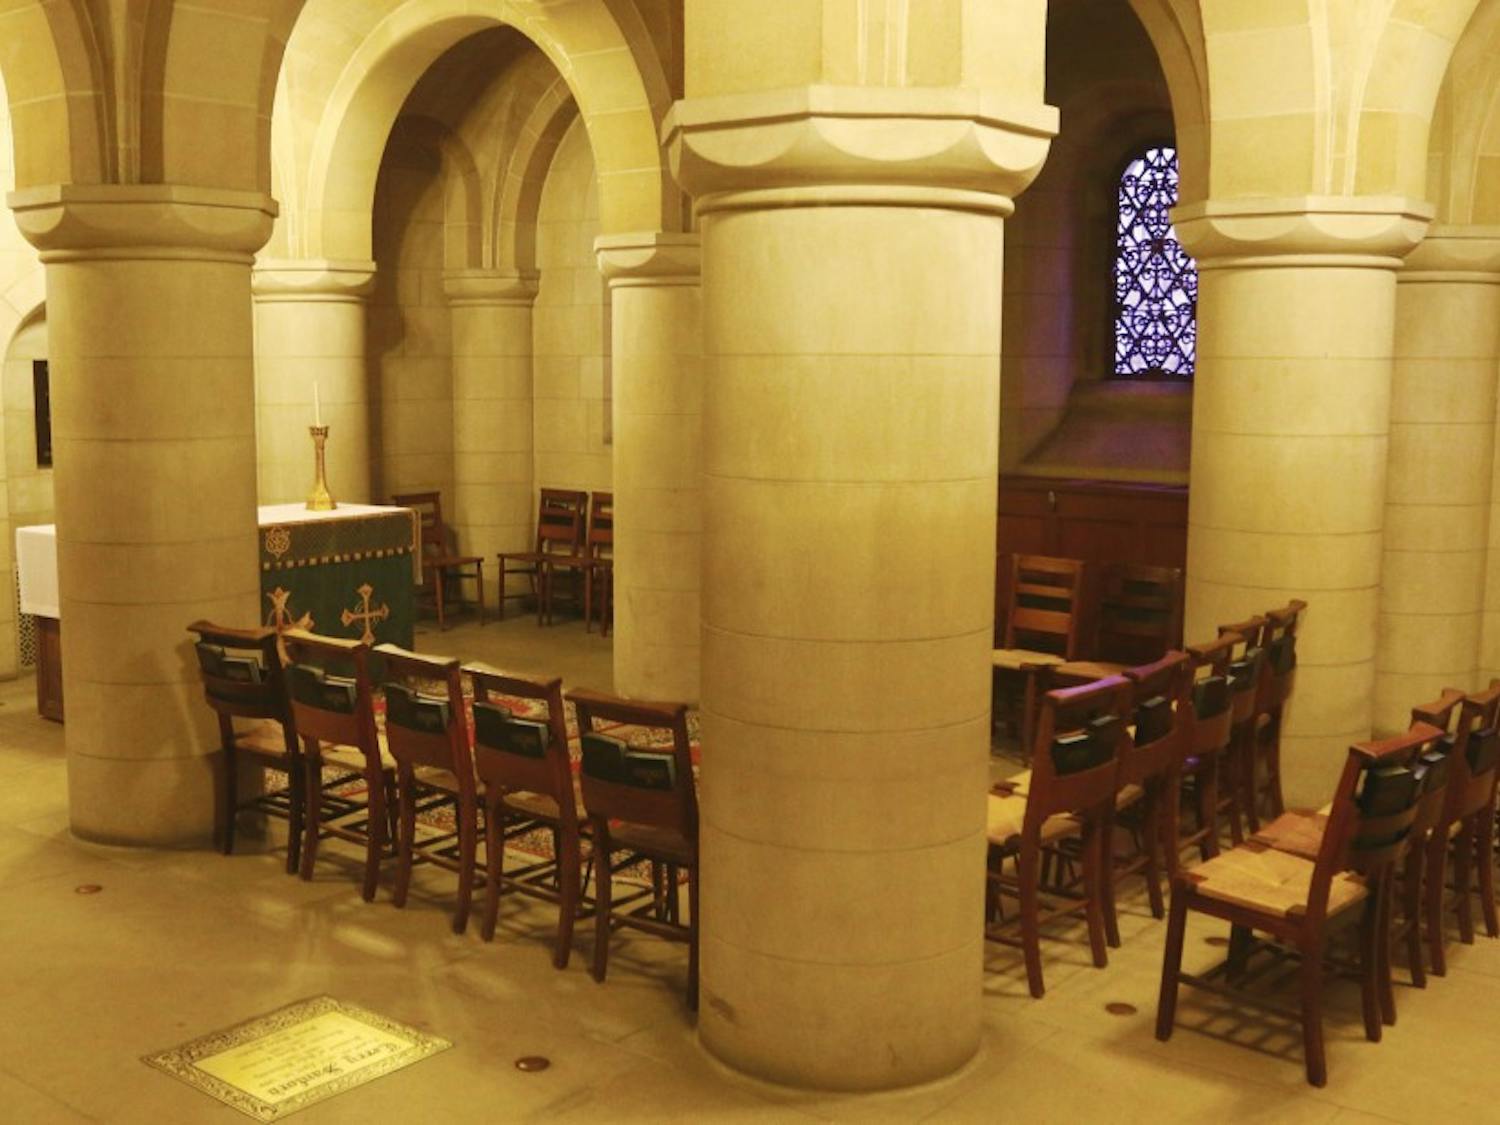 The Chapel crypt has gained various functions over the year.